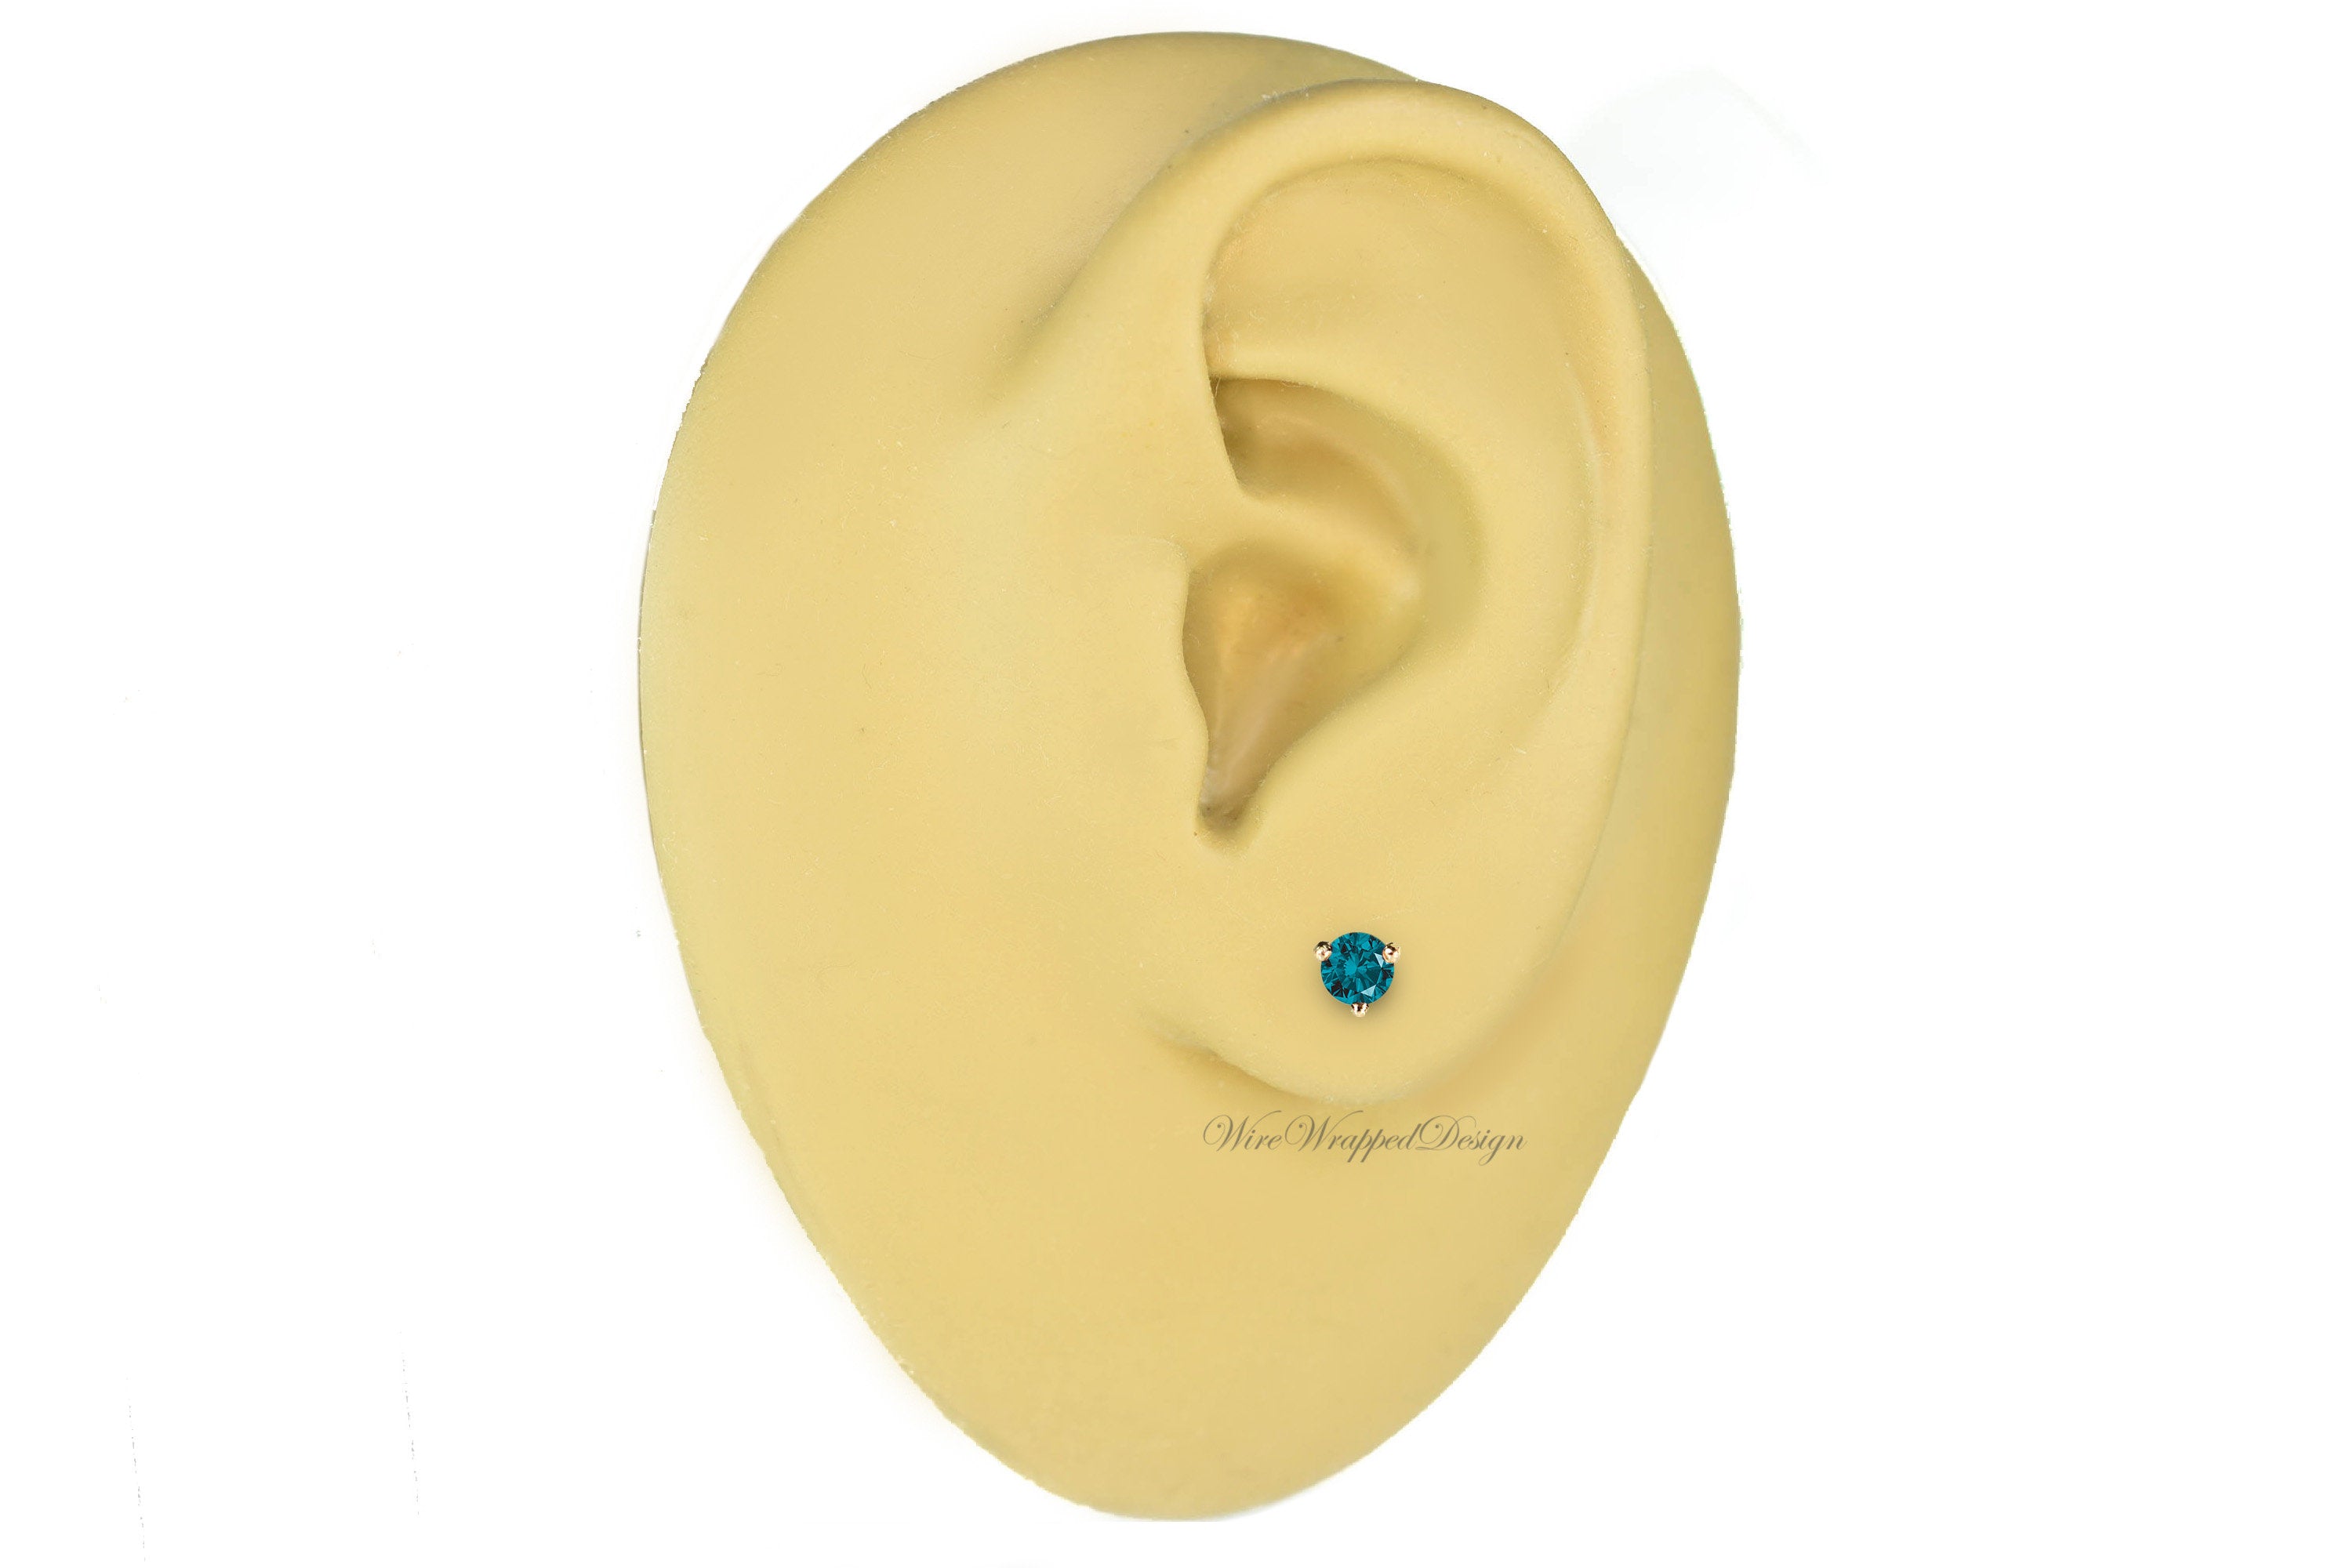 PAIR Genuine Teal BLUE DIAMOND Earrings Studs 3mm 0.2tcw Martini 14k Solid Gold (Yellow, Rose, White) Platinum Silver Cartilage Helix Tragus